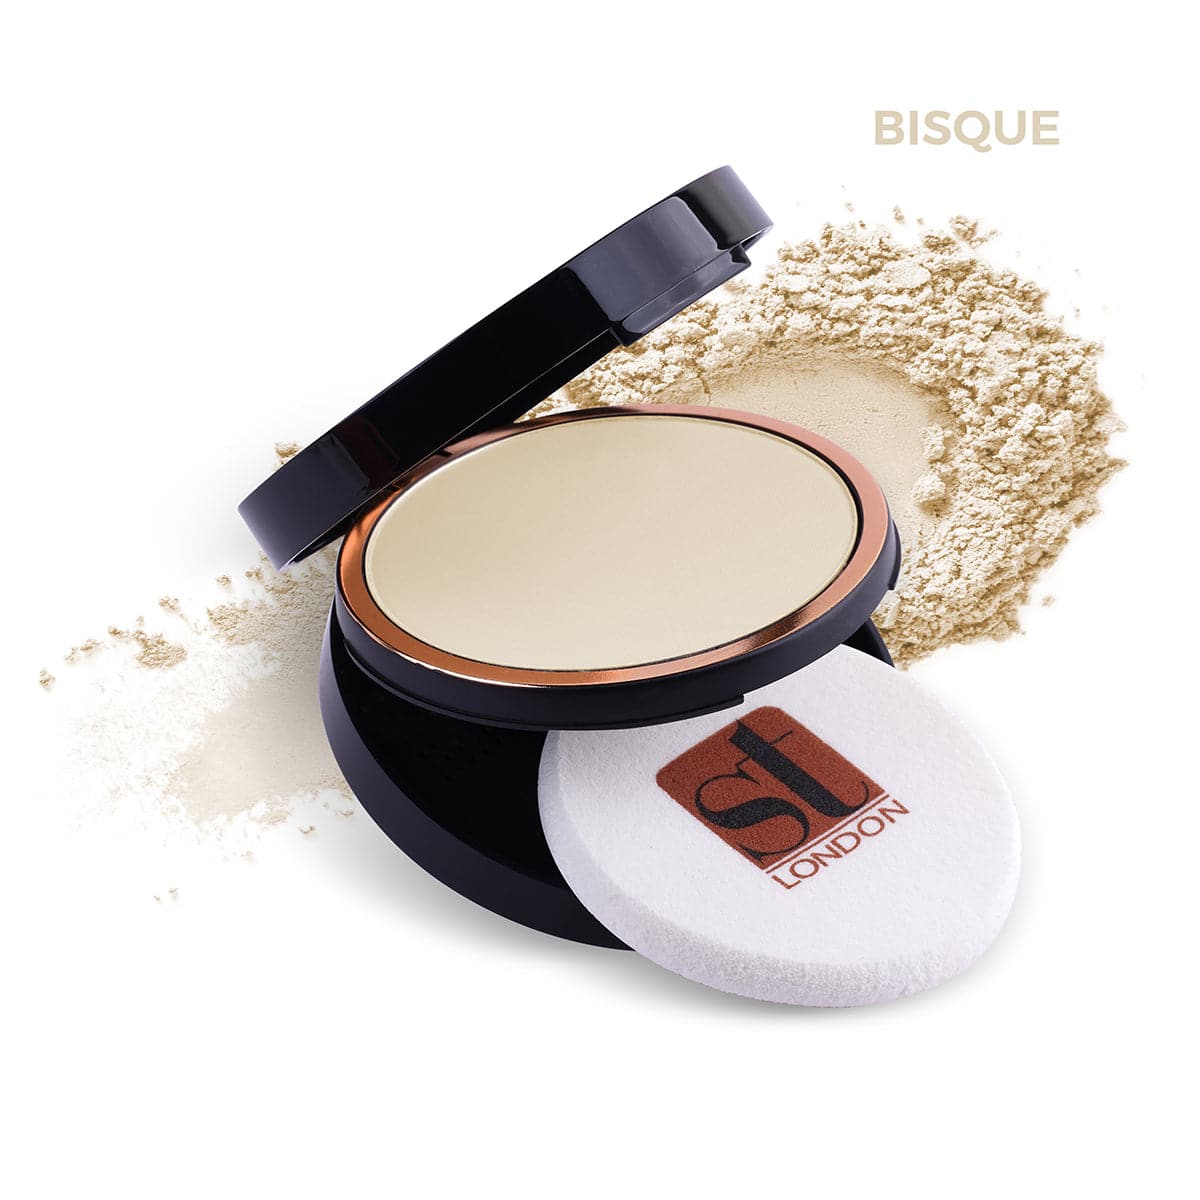 ST London Dual Wet & Dry Compact Powder - Bisque - Premium Health & Beauty from St London - Just Rs 2330.00! Shop now at Cozmetica